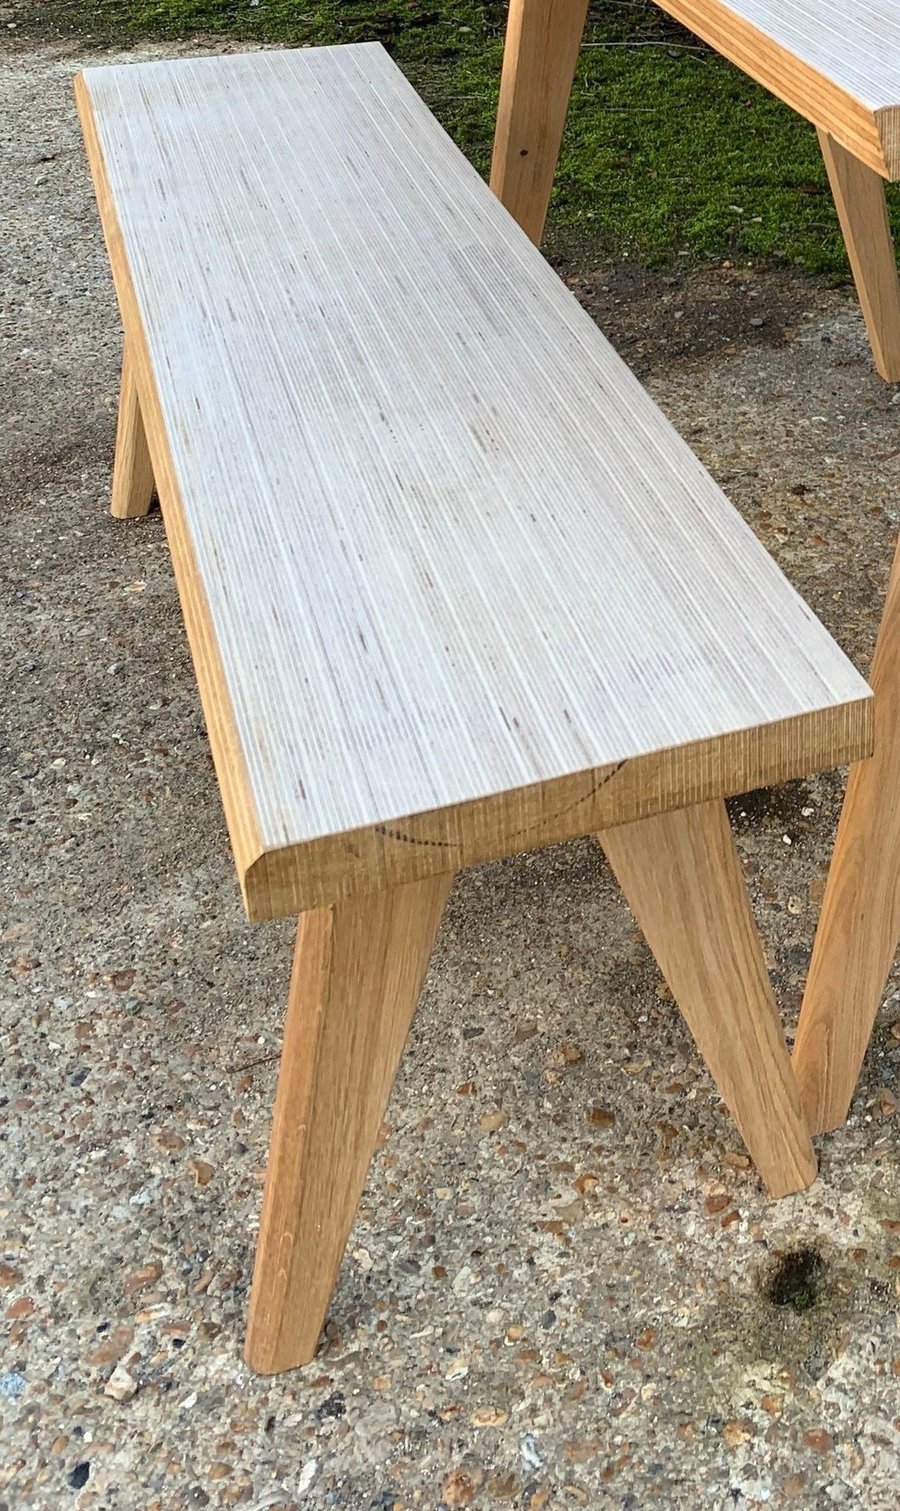 Birch Ply Bench - ideal for hallways, offices, studies or dining rooms